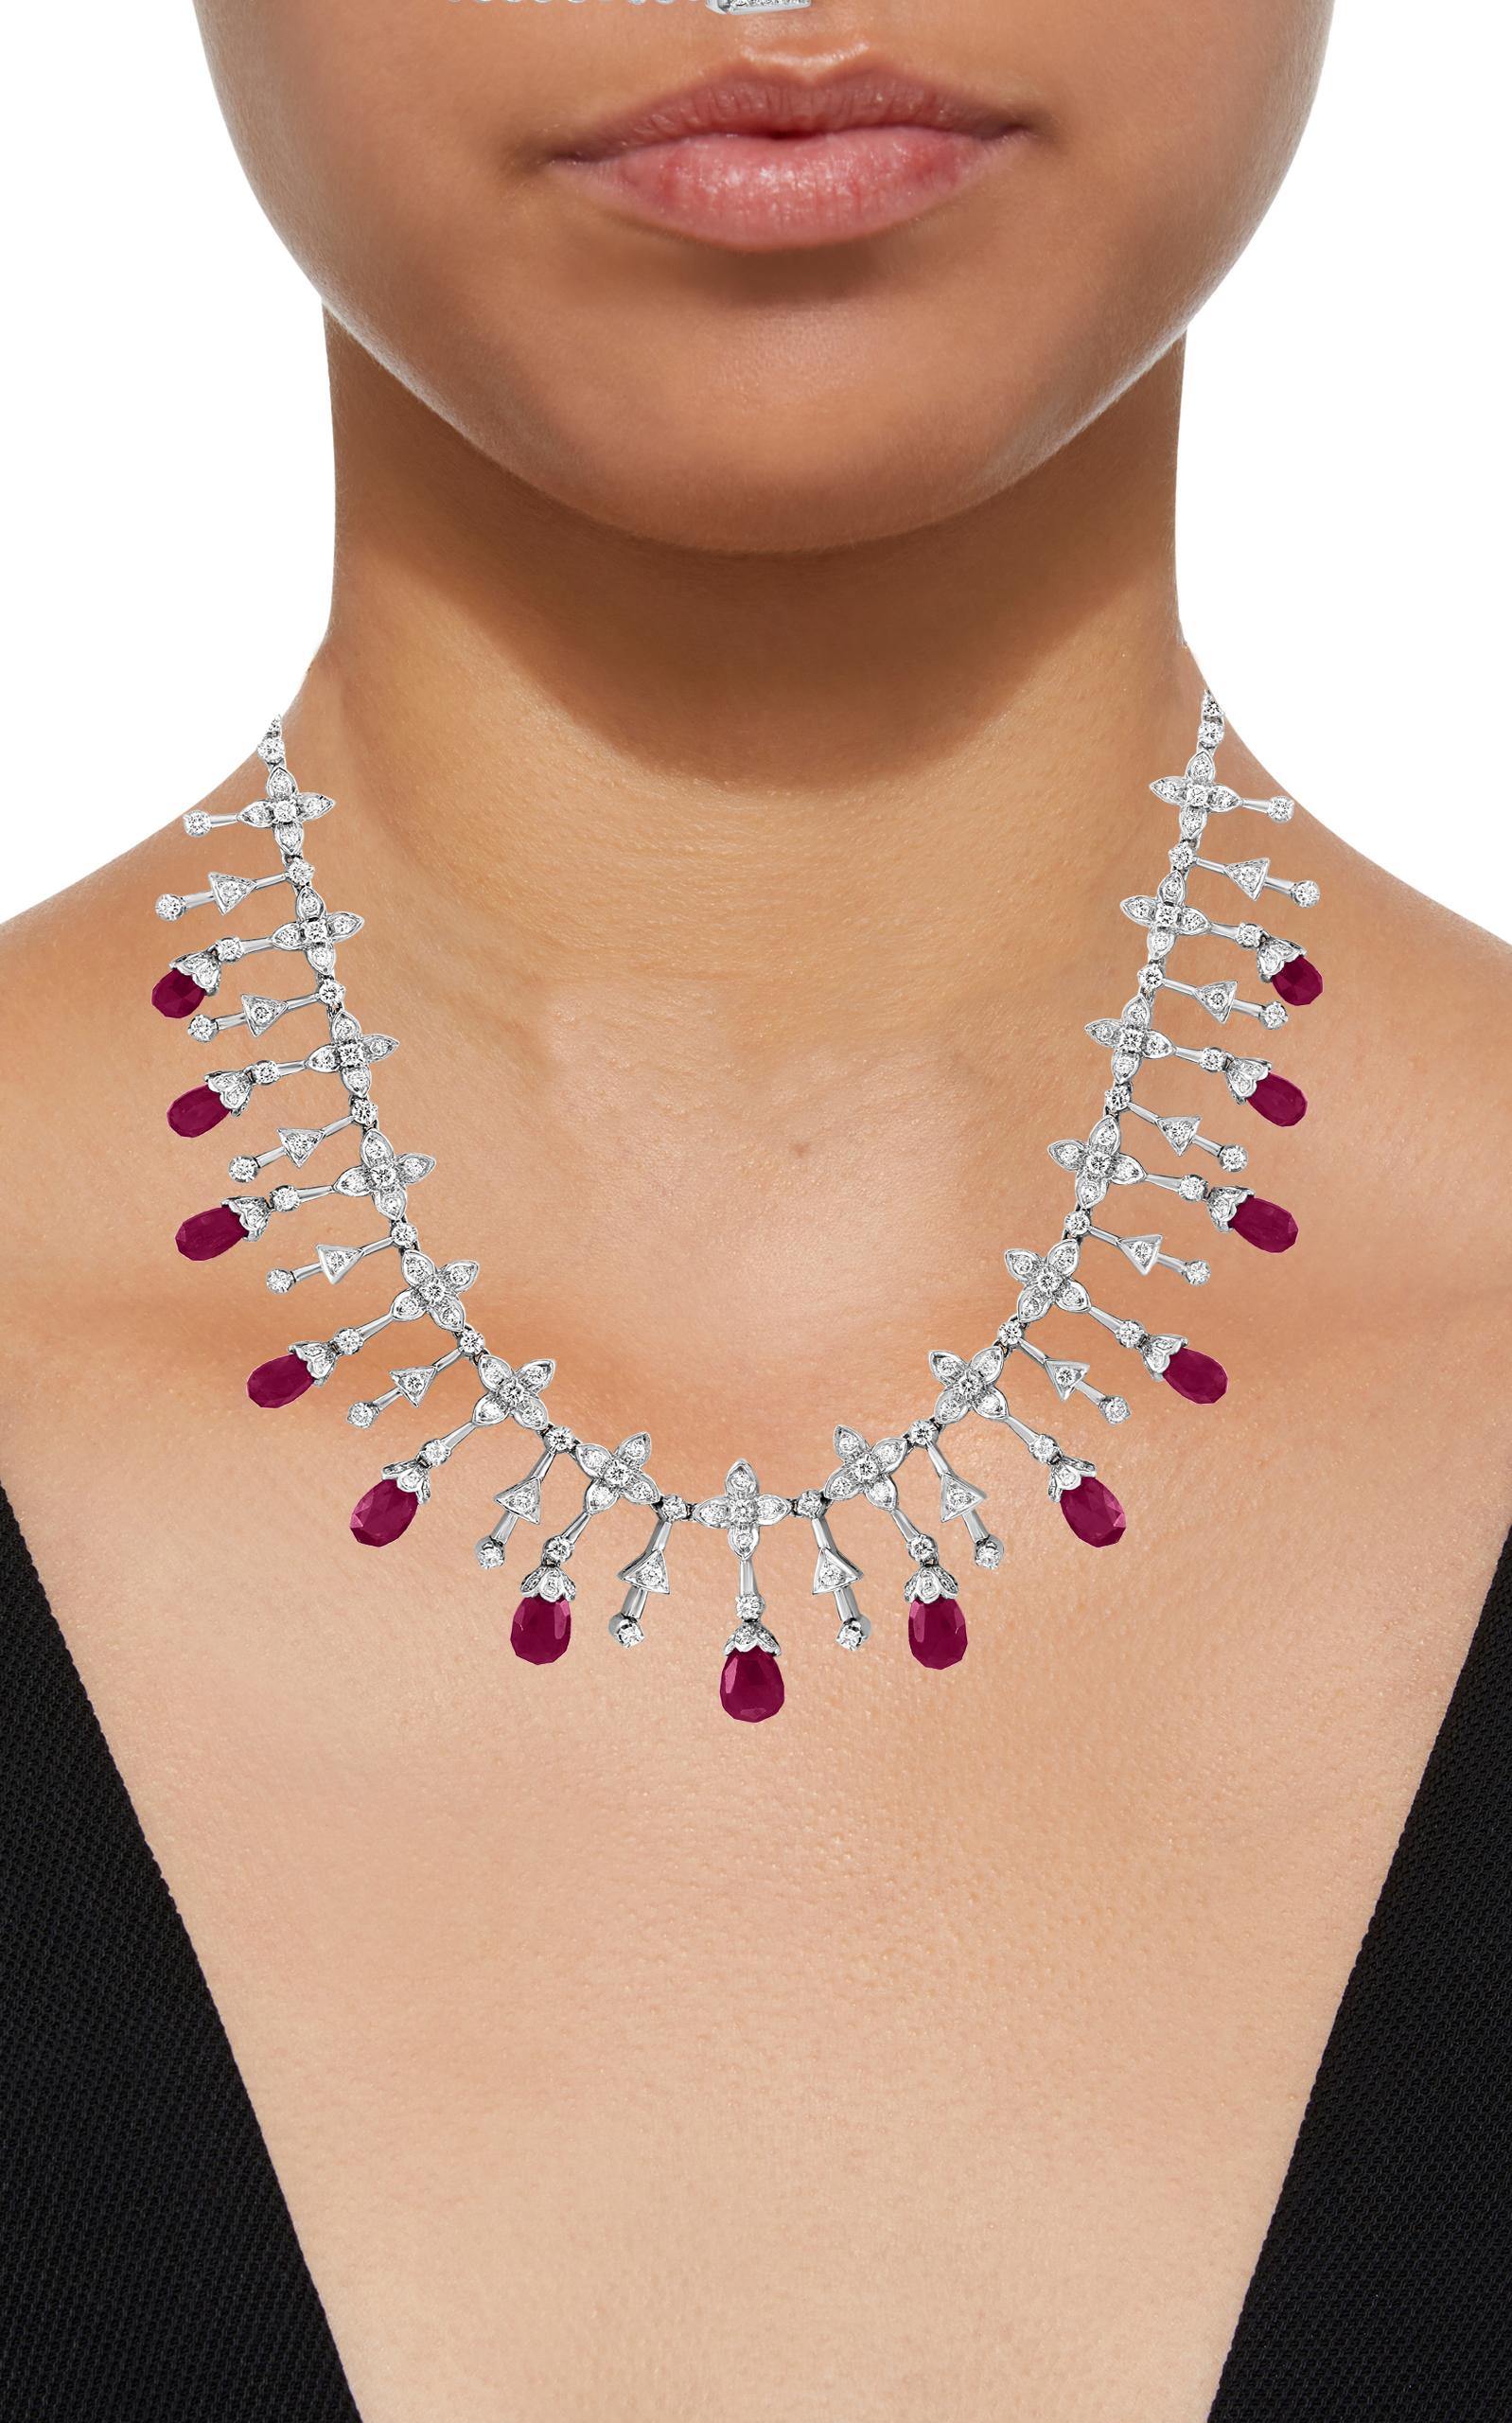 18 Ct Natural Ruby Briolette & 8 Ct Diamond Necklace 18 Karat White Gold, Estate In Excellent Condition For Sale In New York, NY